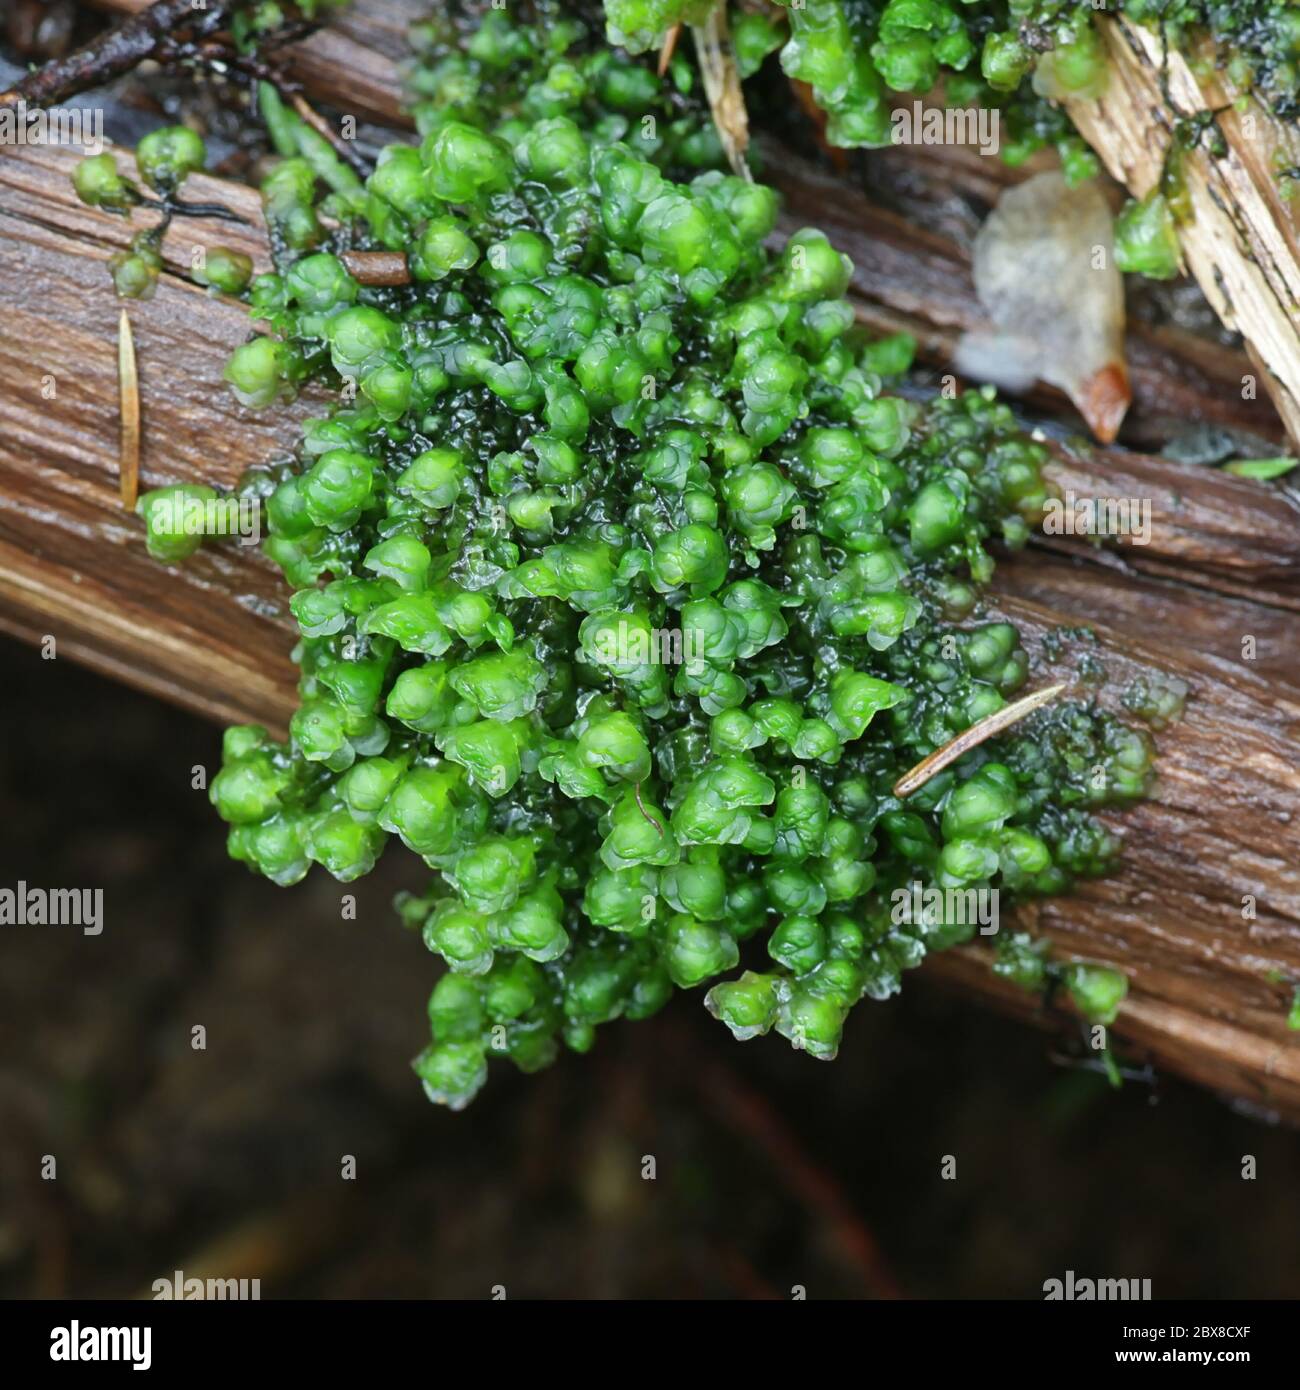 Scapania undulata, the Water Earwort, a liverwort growing on forest streams in Finland Stock Photo